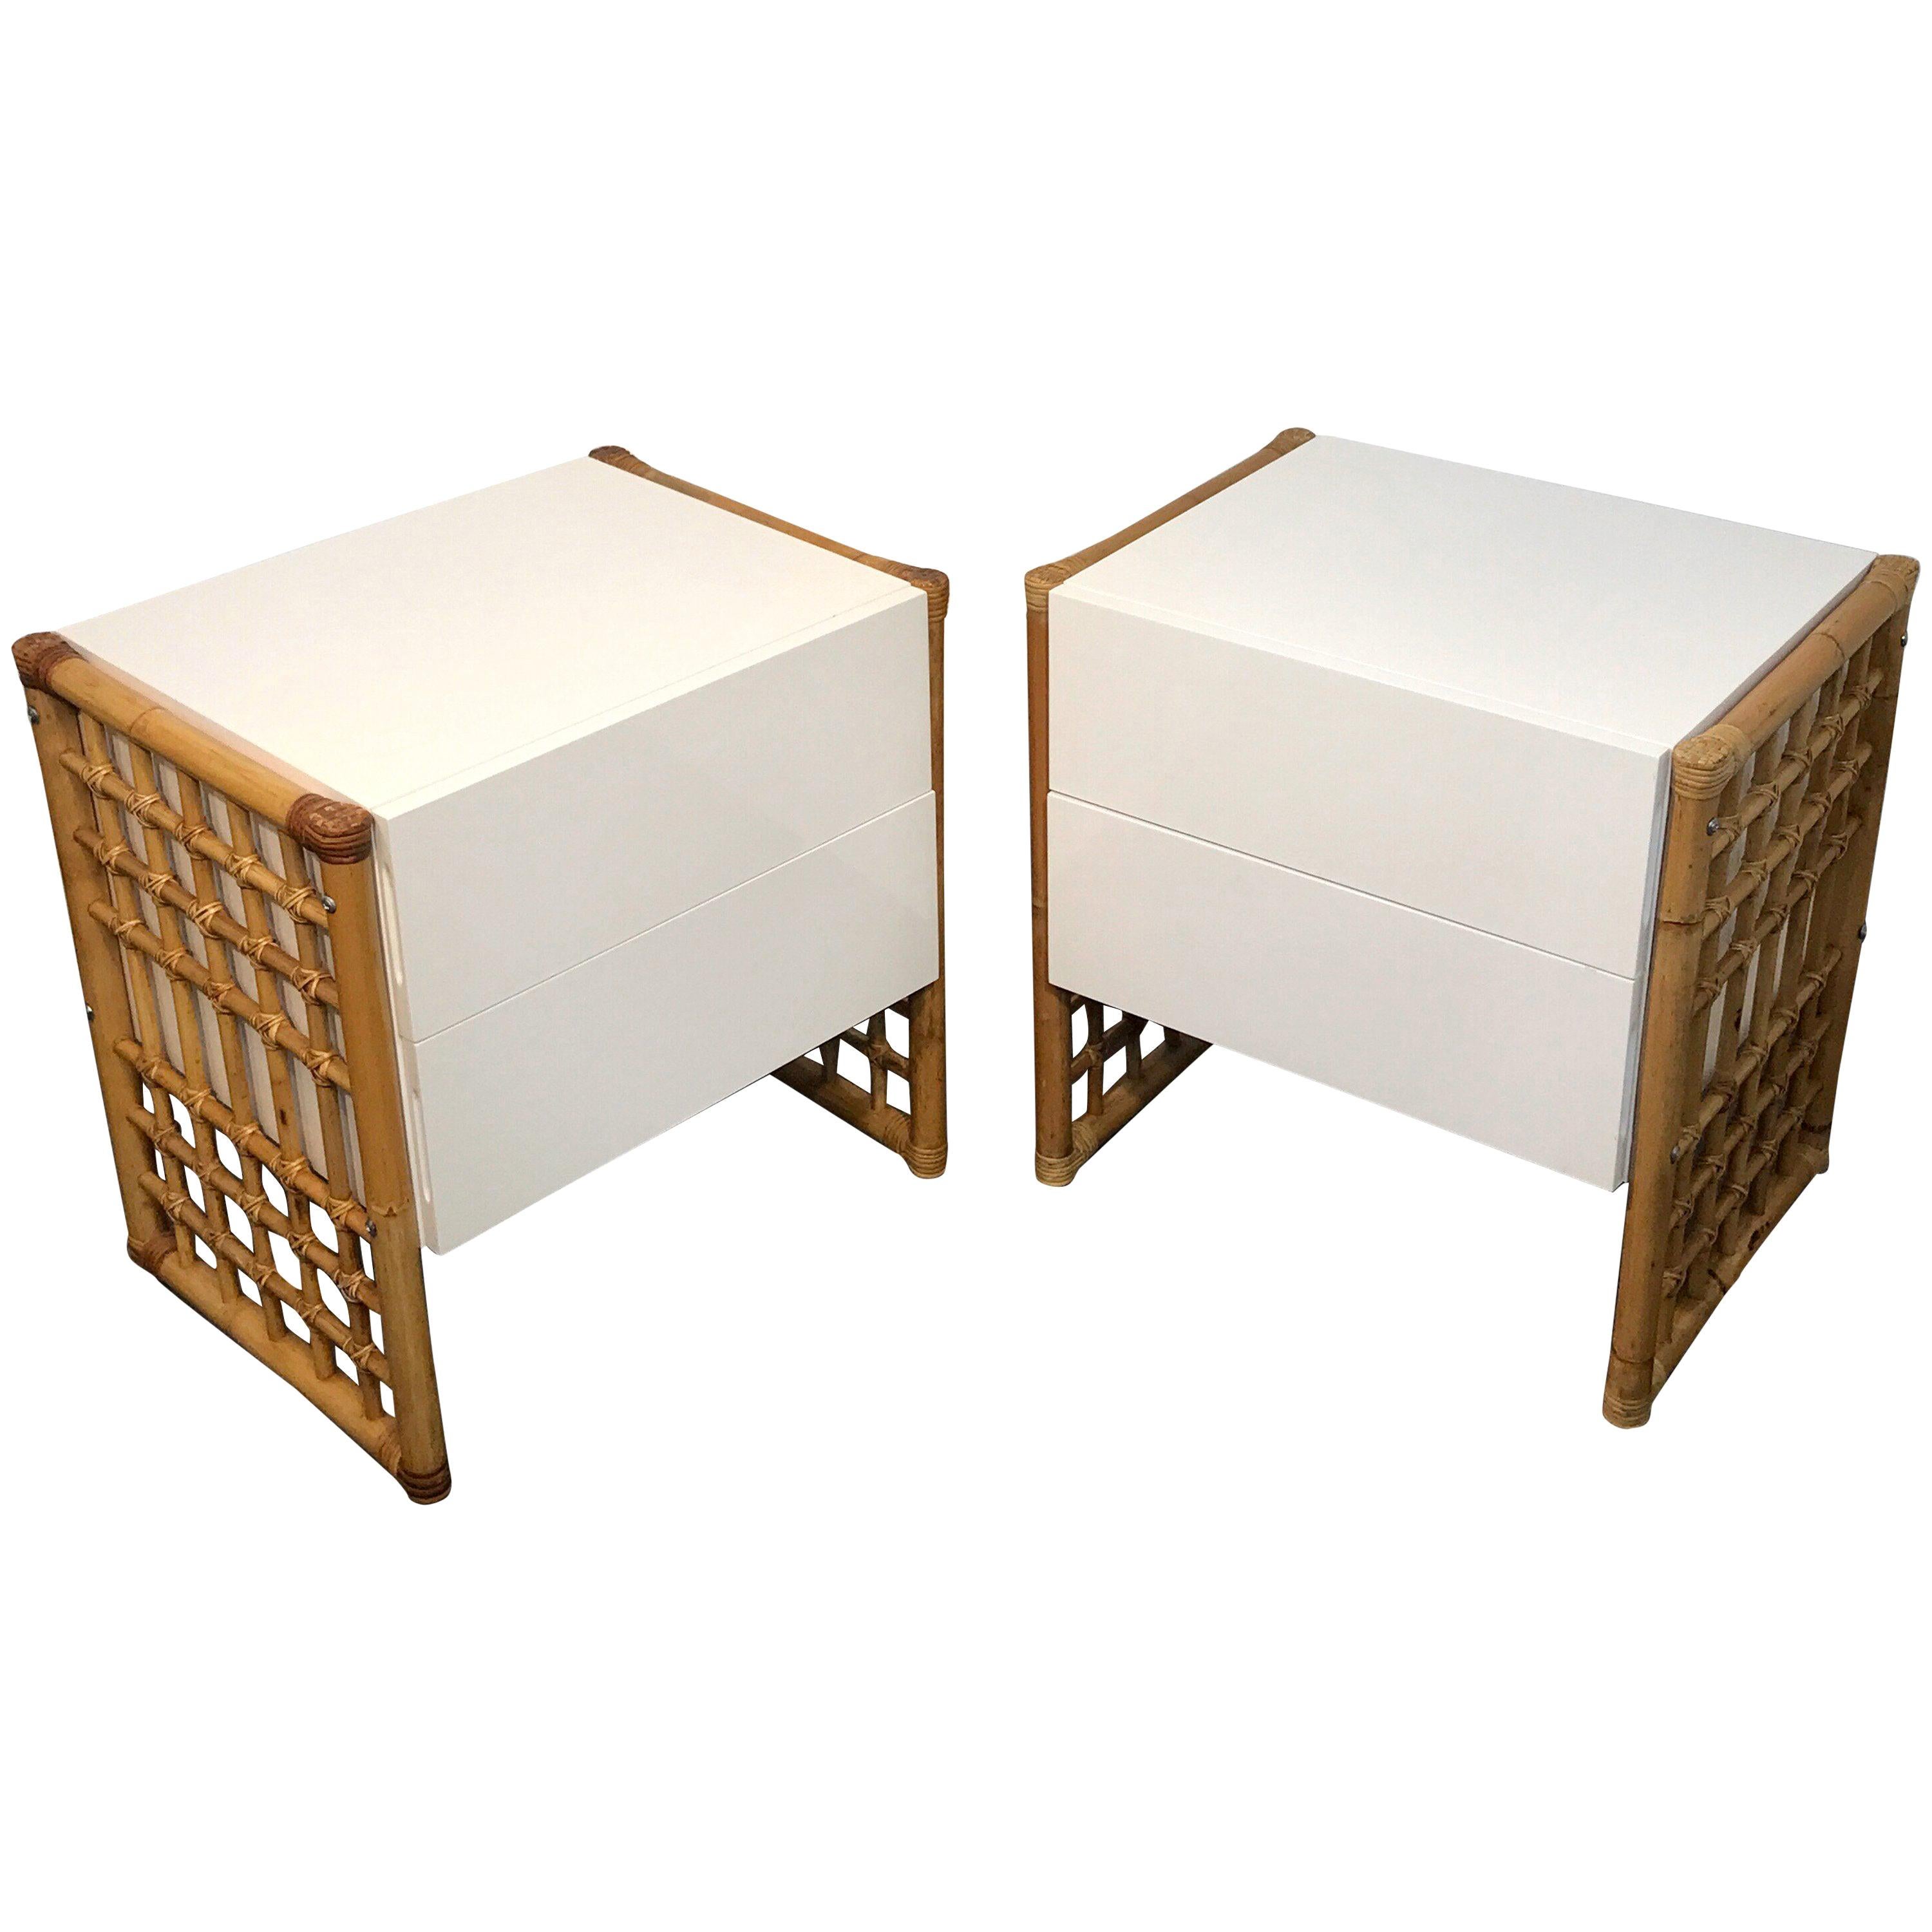 Pair of Sleek Modern White Lacquered and Rattan End Tables or Nightstands